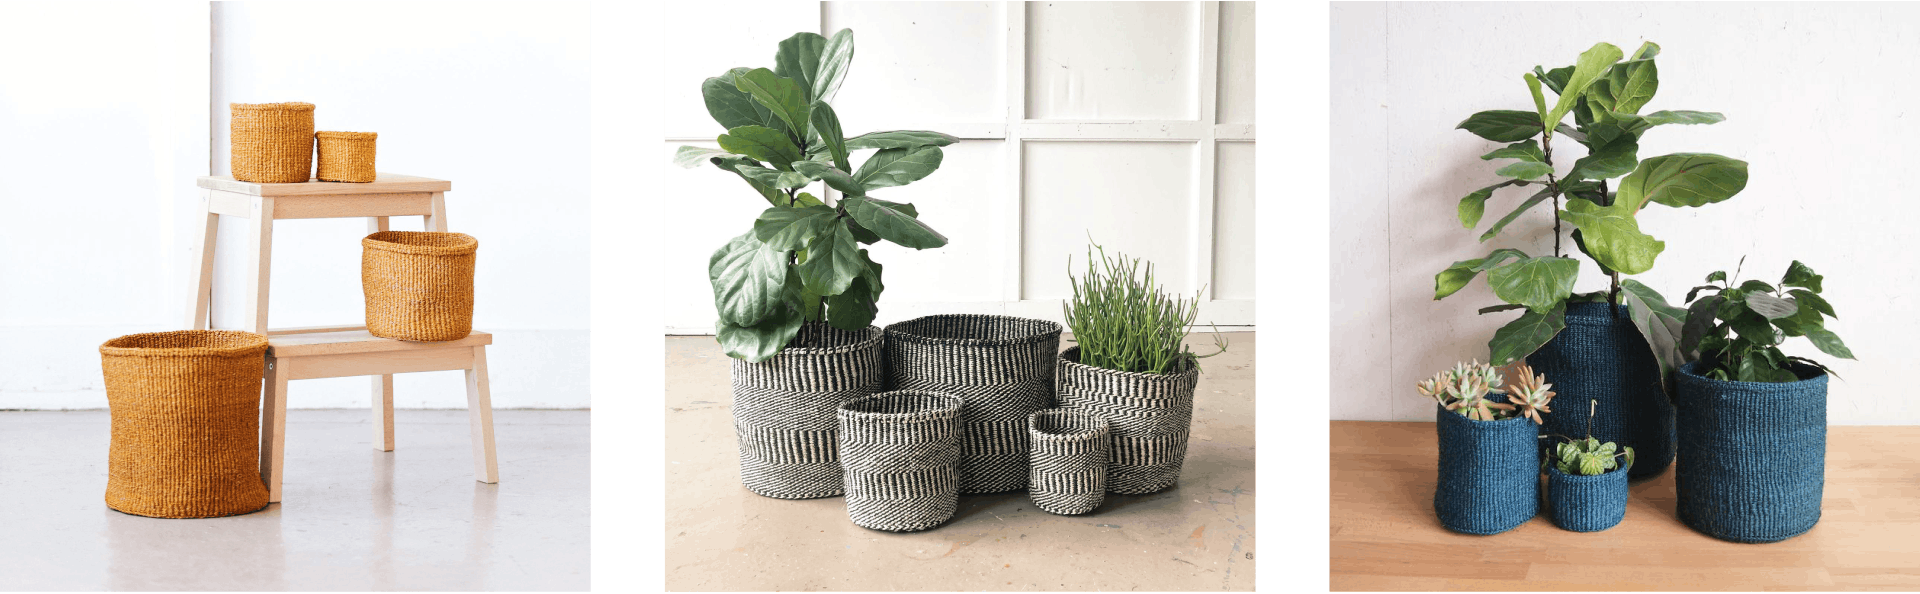  Three images of orange, grey, and blue woven planters in varying sizes.